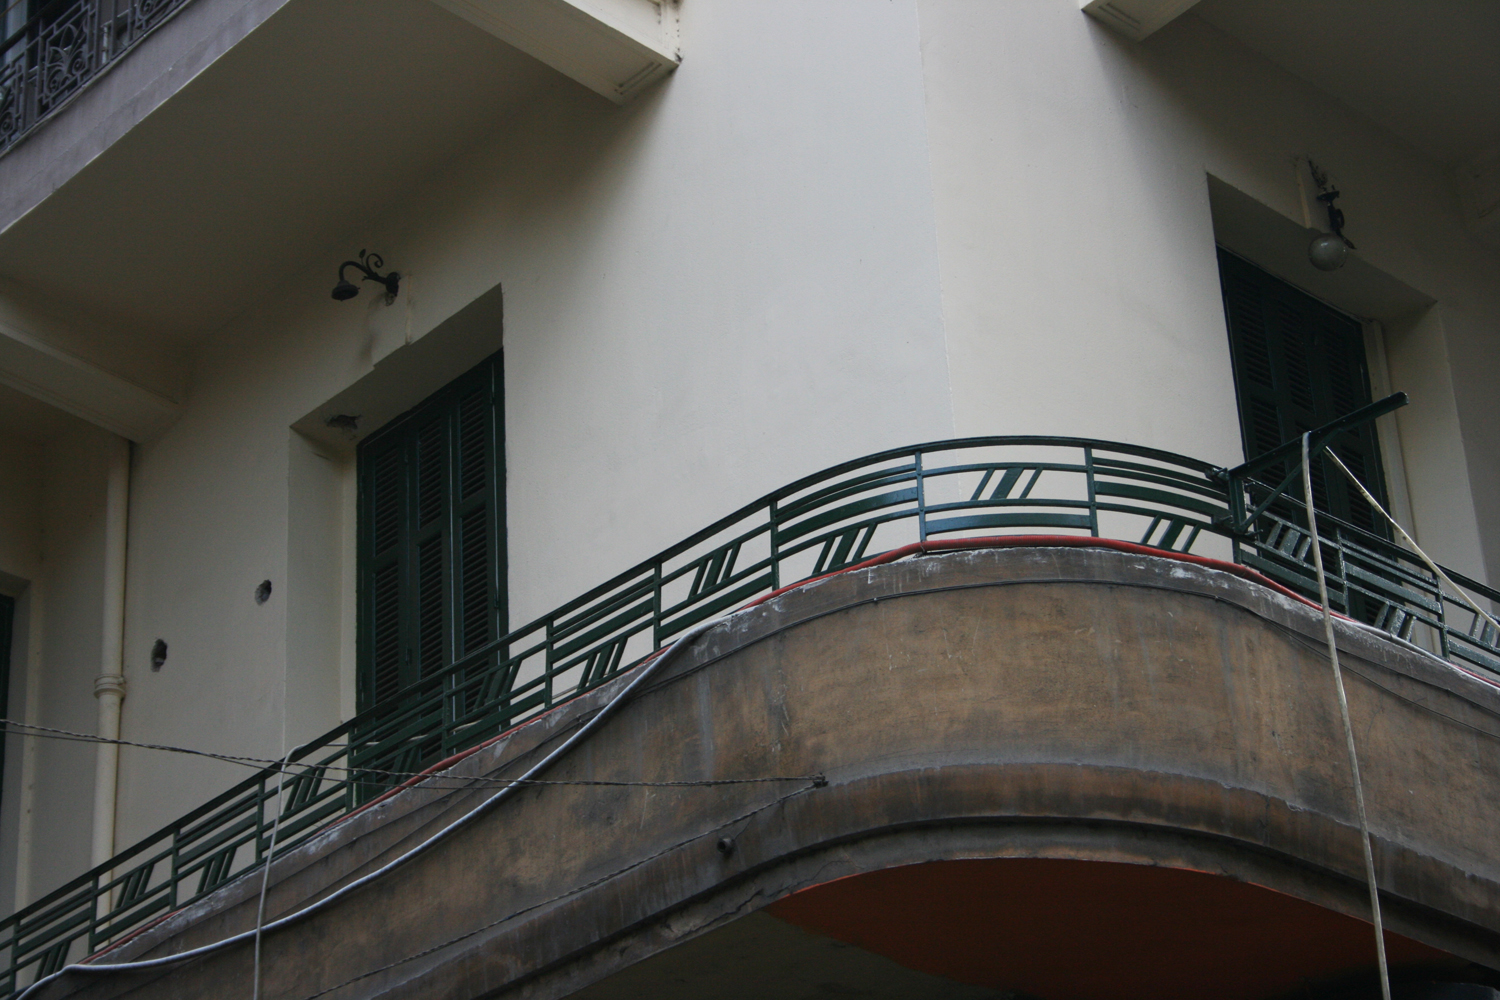 Detail of the horizontal balcony with rounded edge and geometrical wrought iron forms